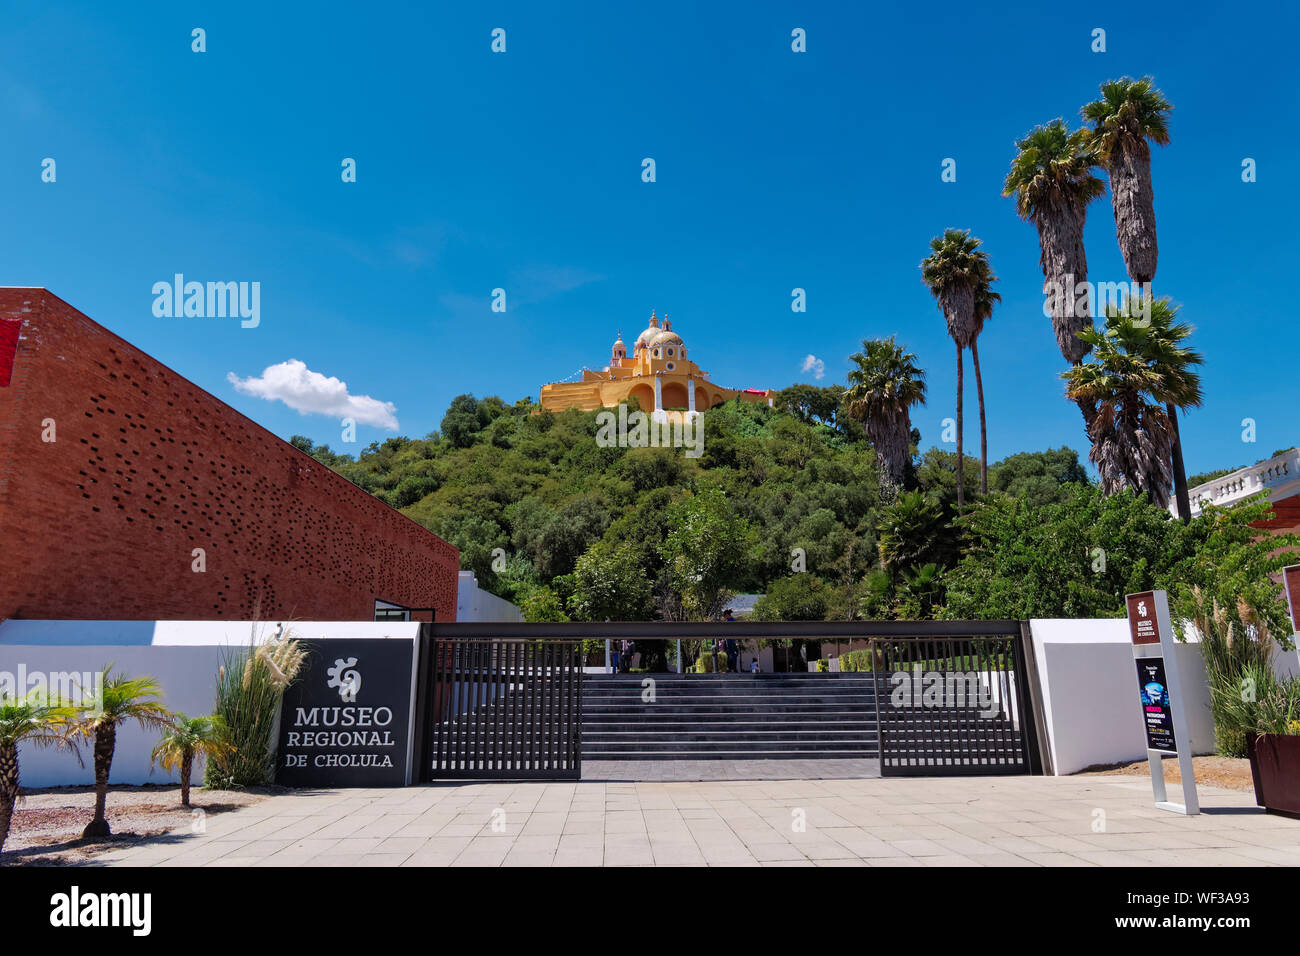 San Andres Cholula, Mexico, September 30, 2018 - Beautiful Shrine of Our Lady of Remedies sanctuary and Regional Museum at sunny day with blue sky. Stock Photo